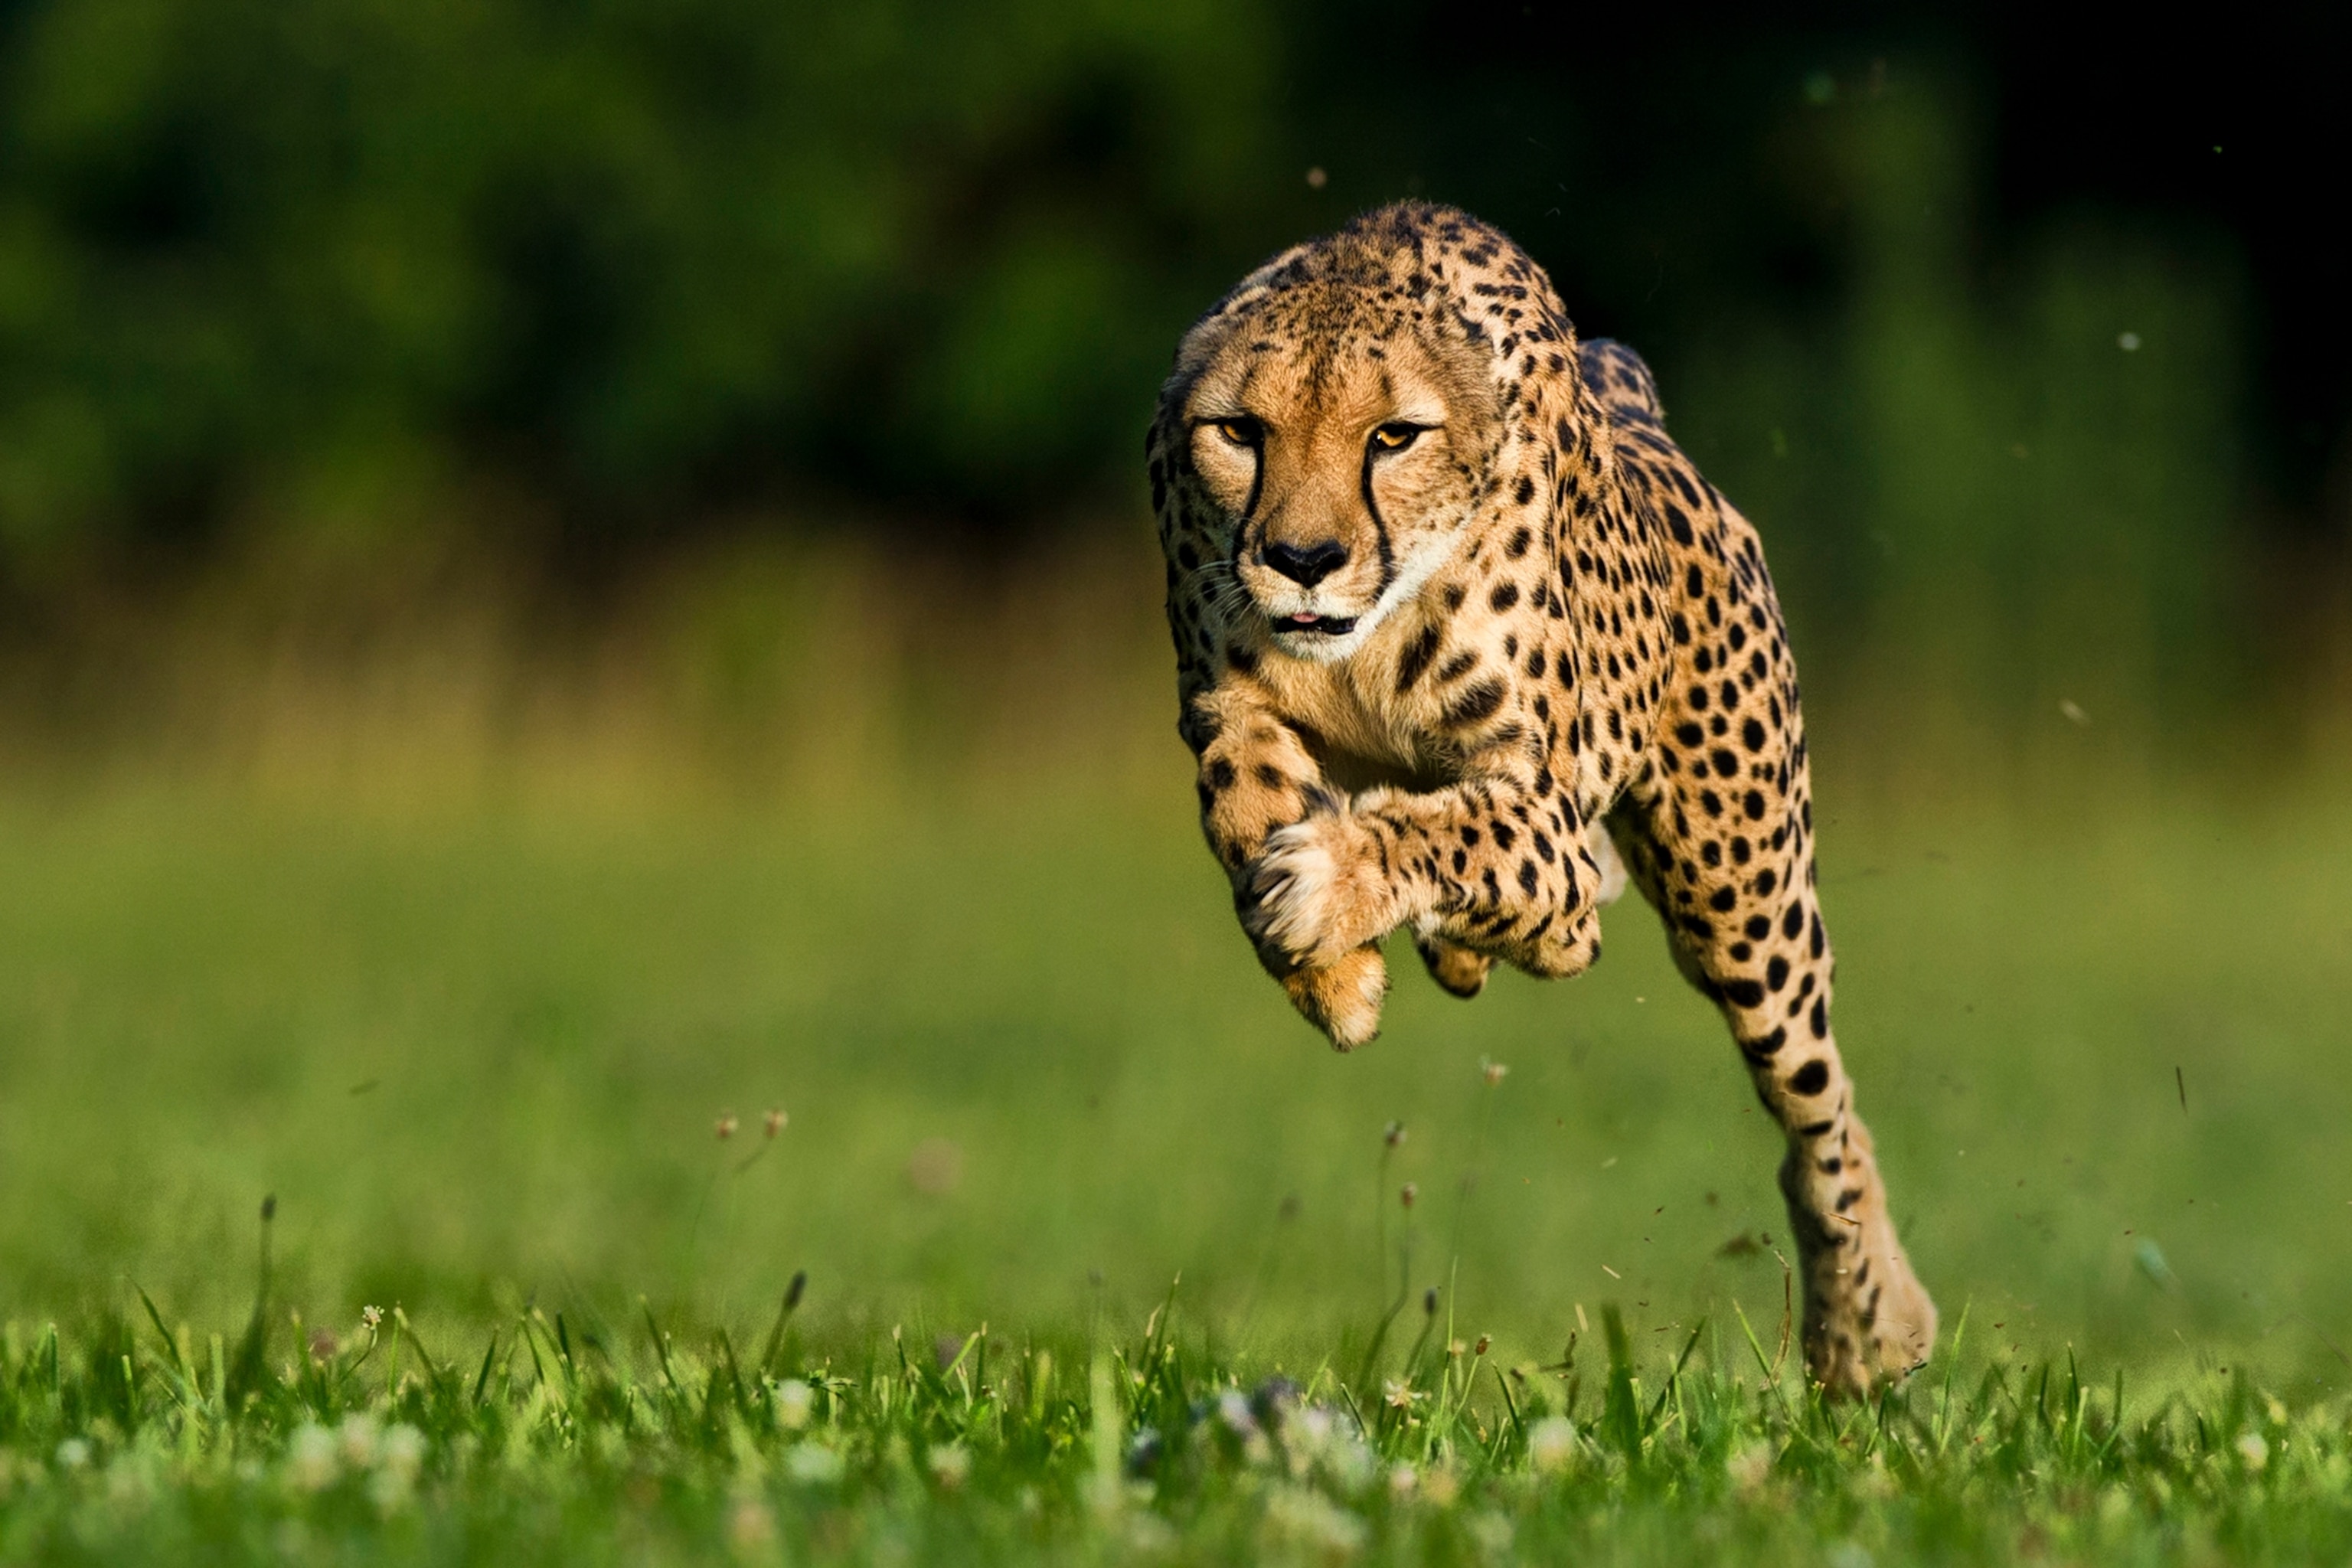 What was the name of the cheetah that has recorded the fastest speed?